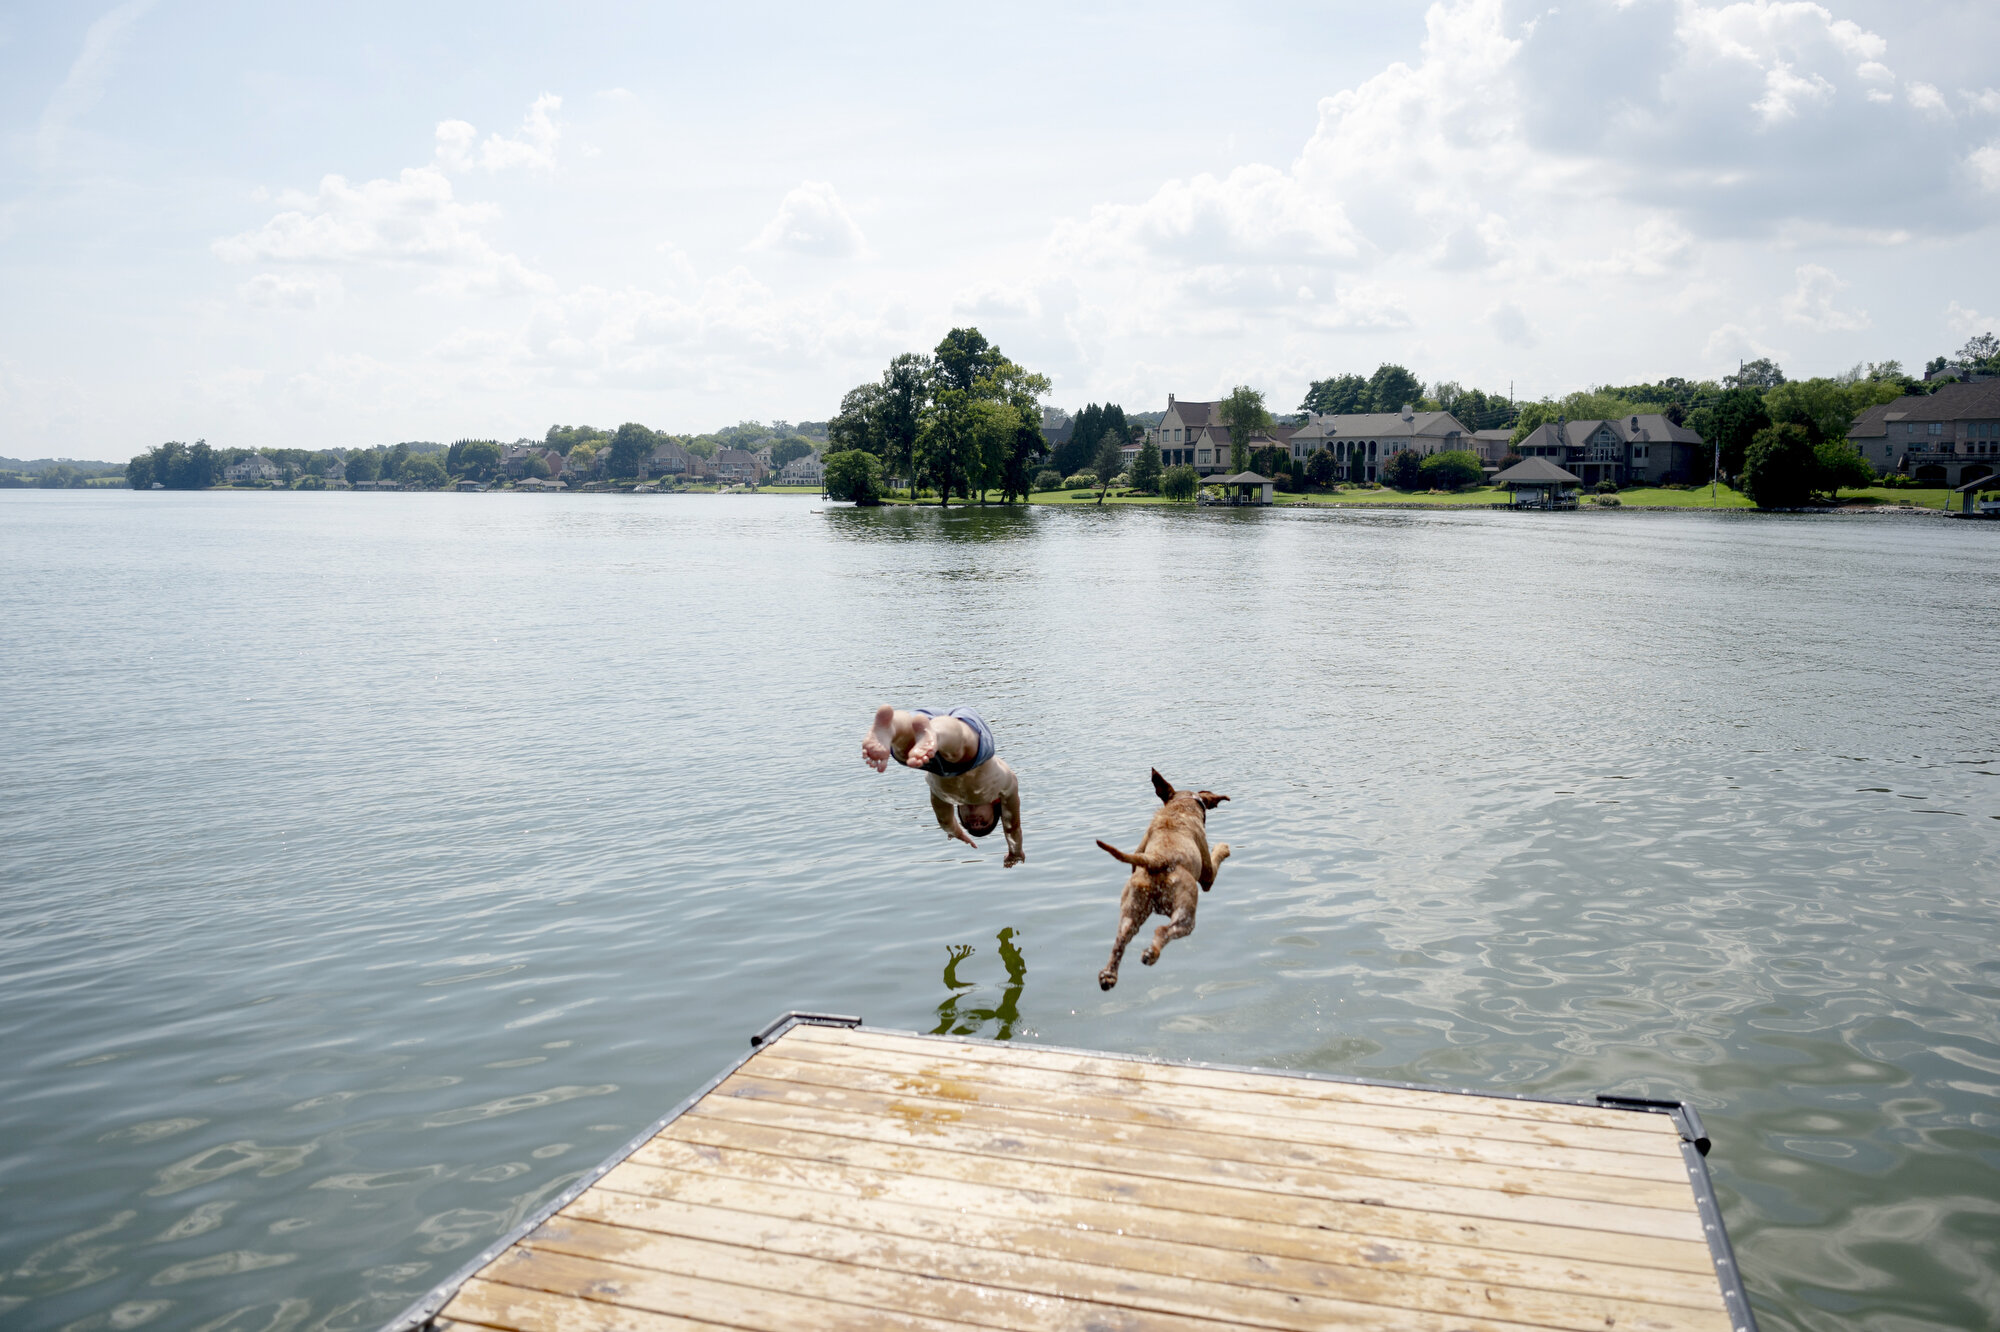  Ethan Fulford dives into Lake Loudoun with his his one-year-old puppy, Loki, at Carl Cowan Park during a hot summer day in Knoxville. 